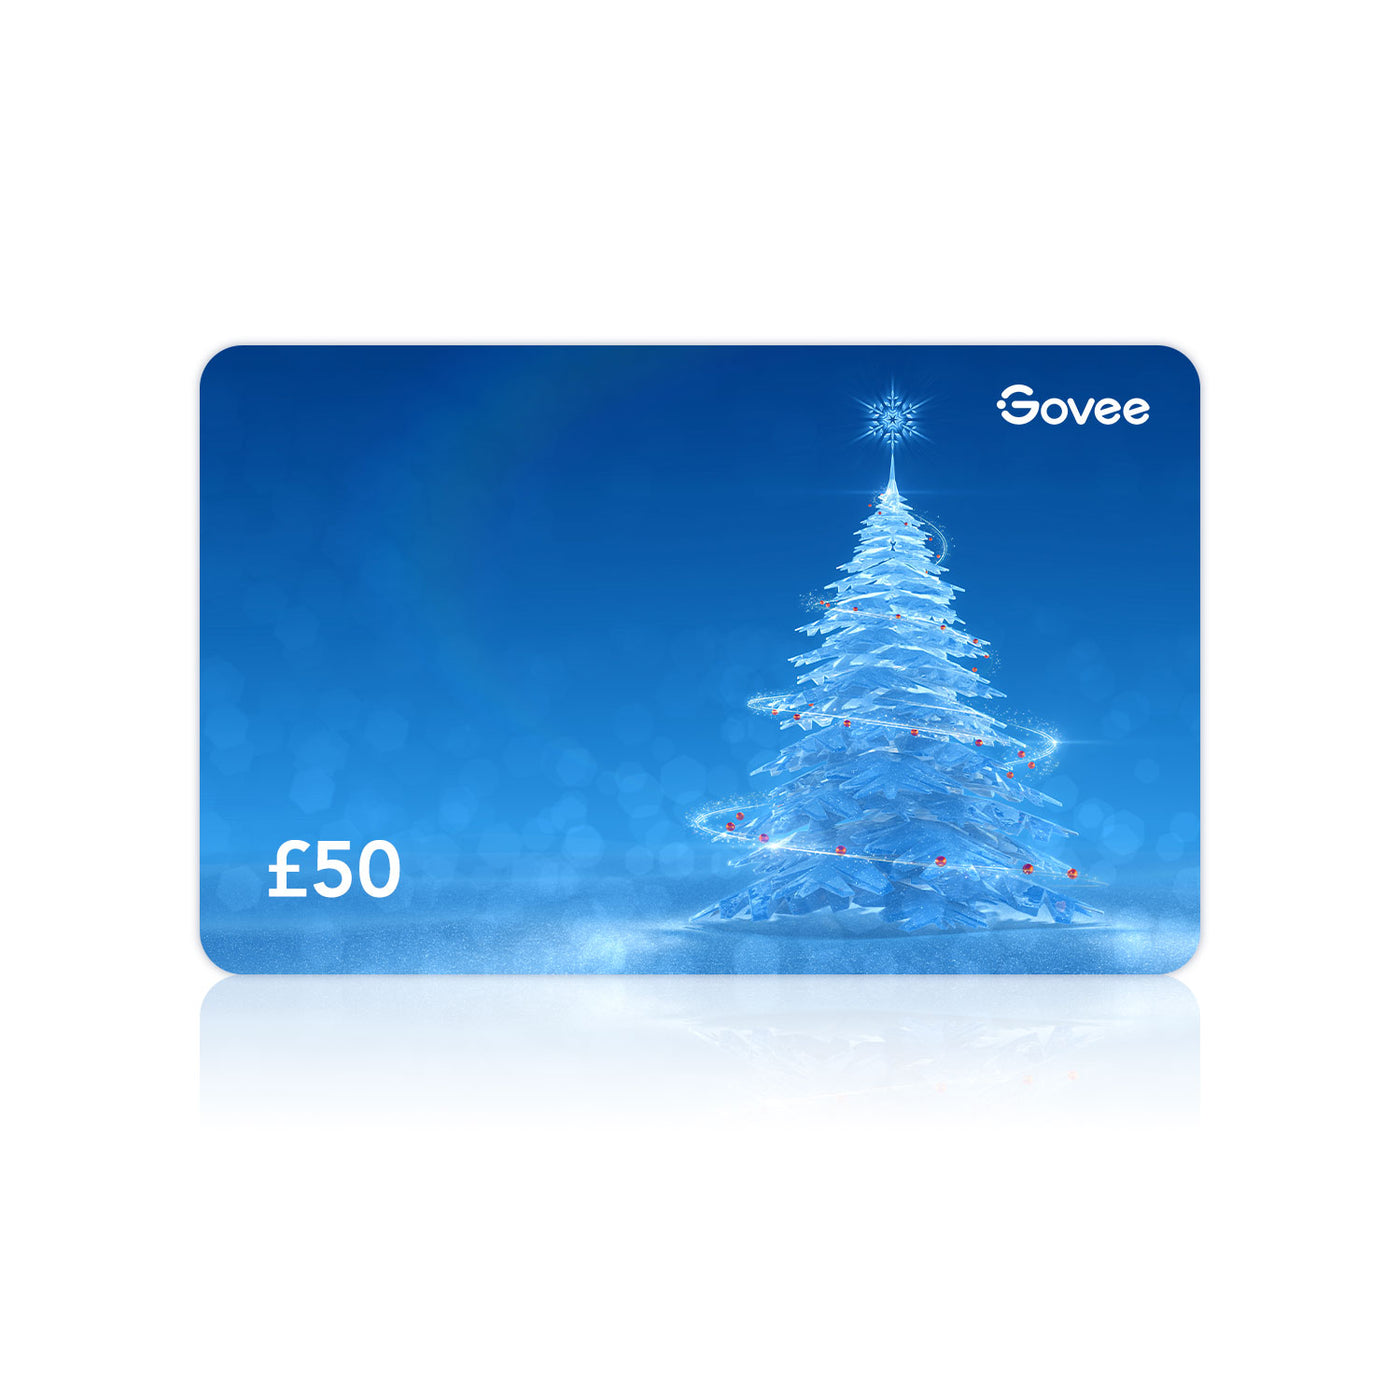 Give the Gift of Govee with a Gift Card!